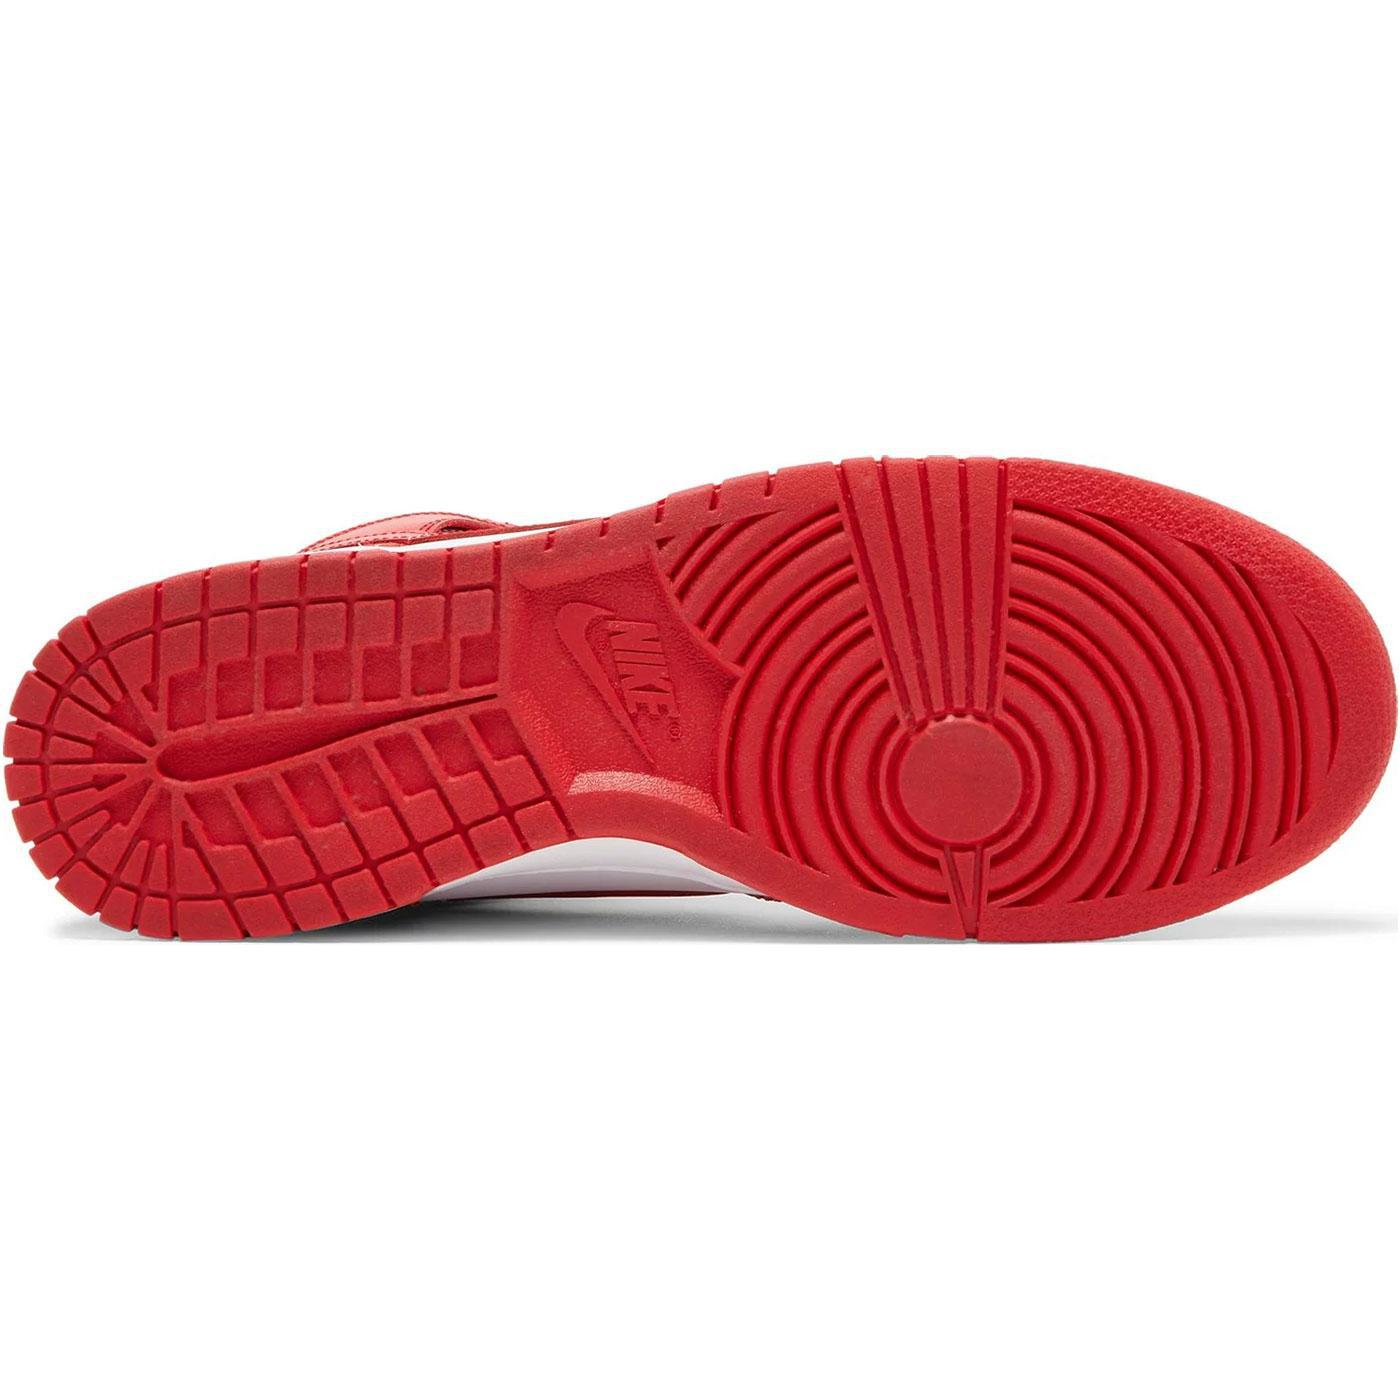 Dunk High 'Championship Red' DD1399 106 Sole | Nike